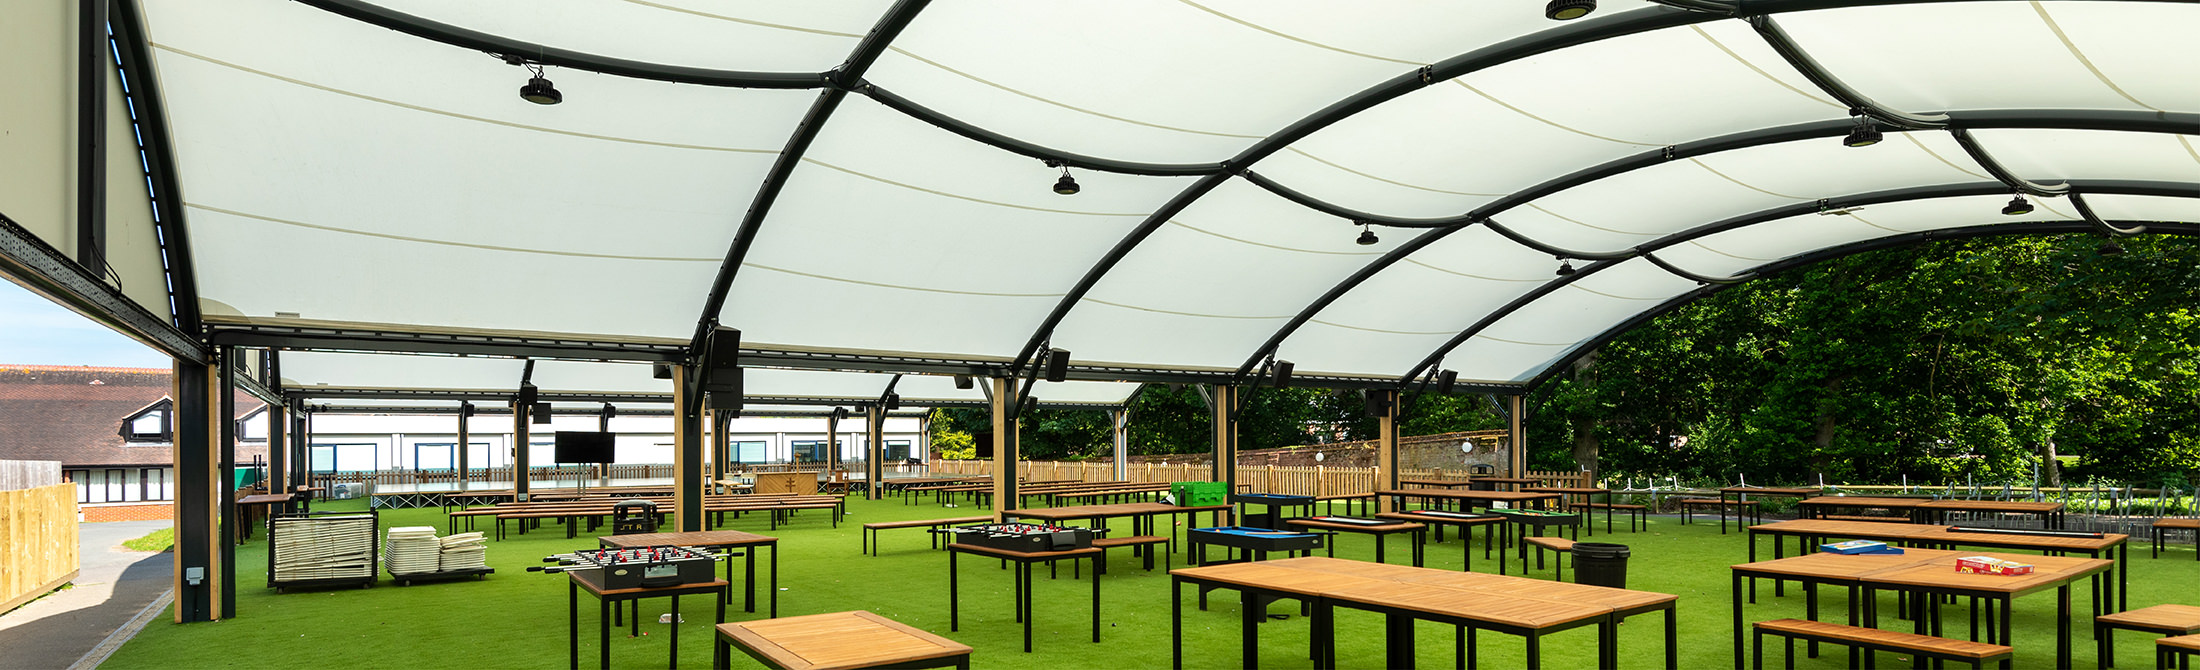 School canopy for outdoor learning